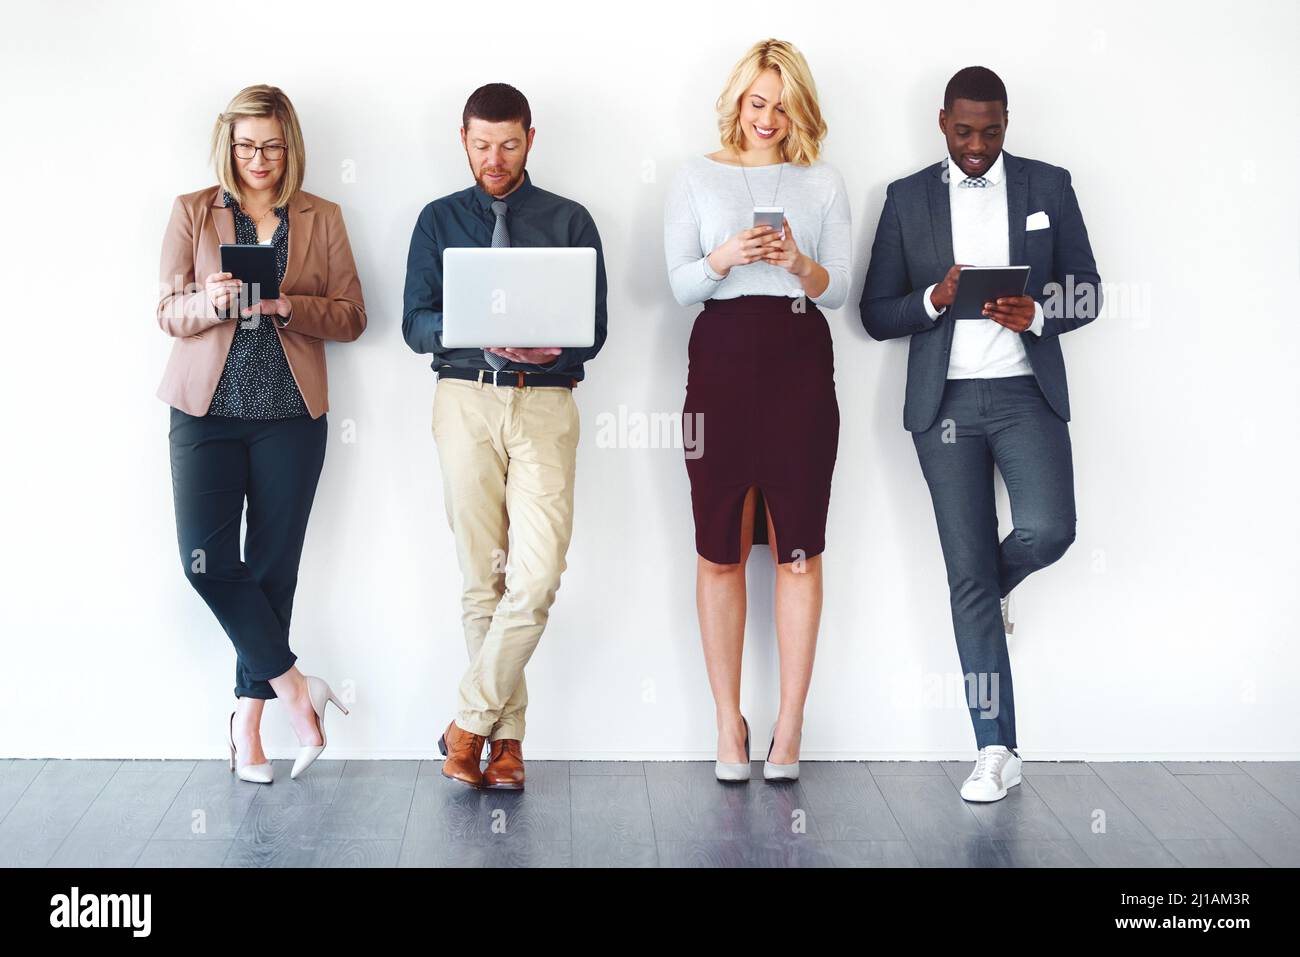 We have all the information needed to succeed. Shot of a group of entrepreneurs using wireless devices against a white background. Stock Photo